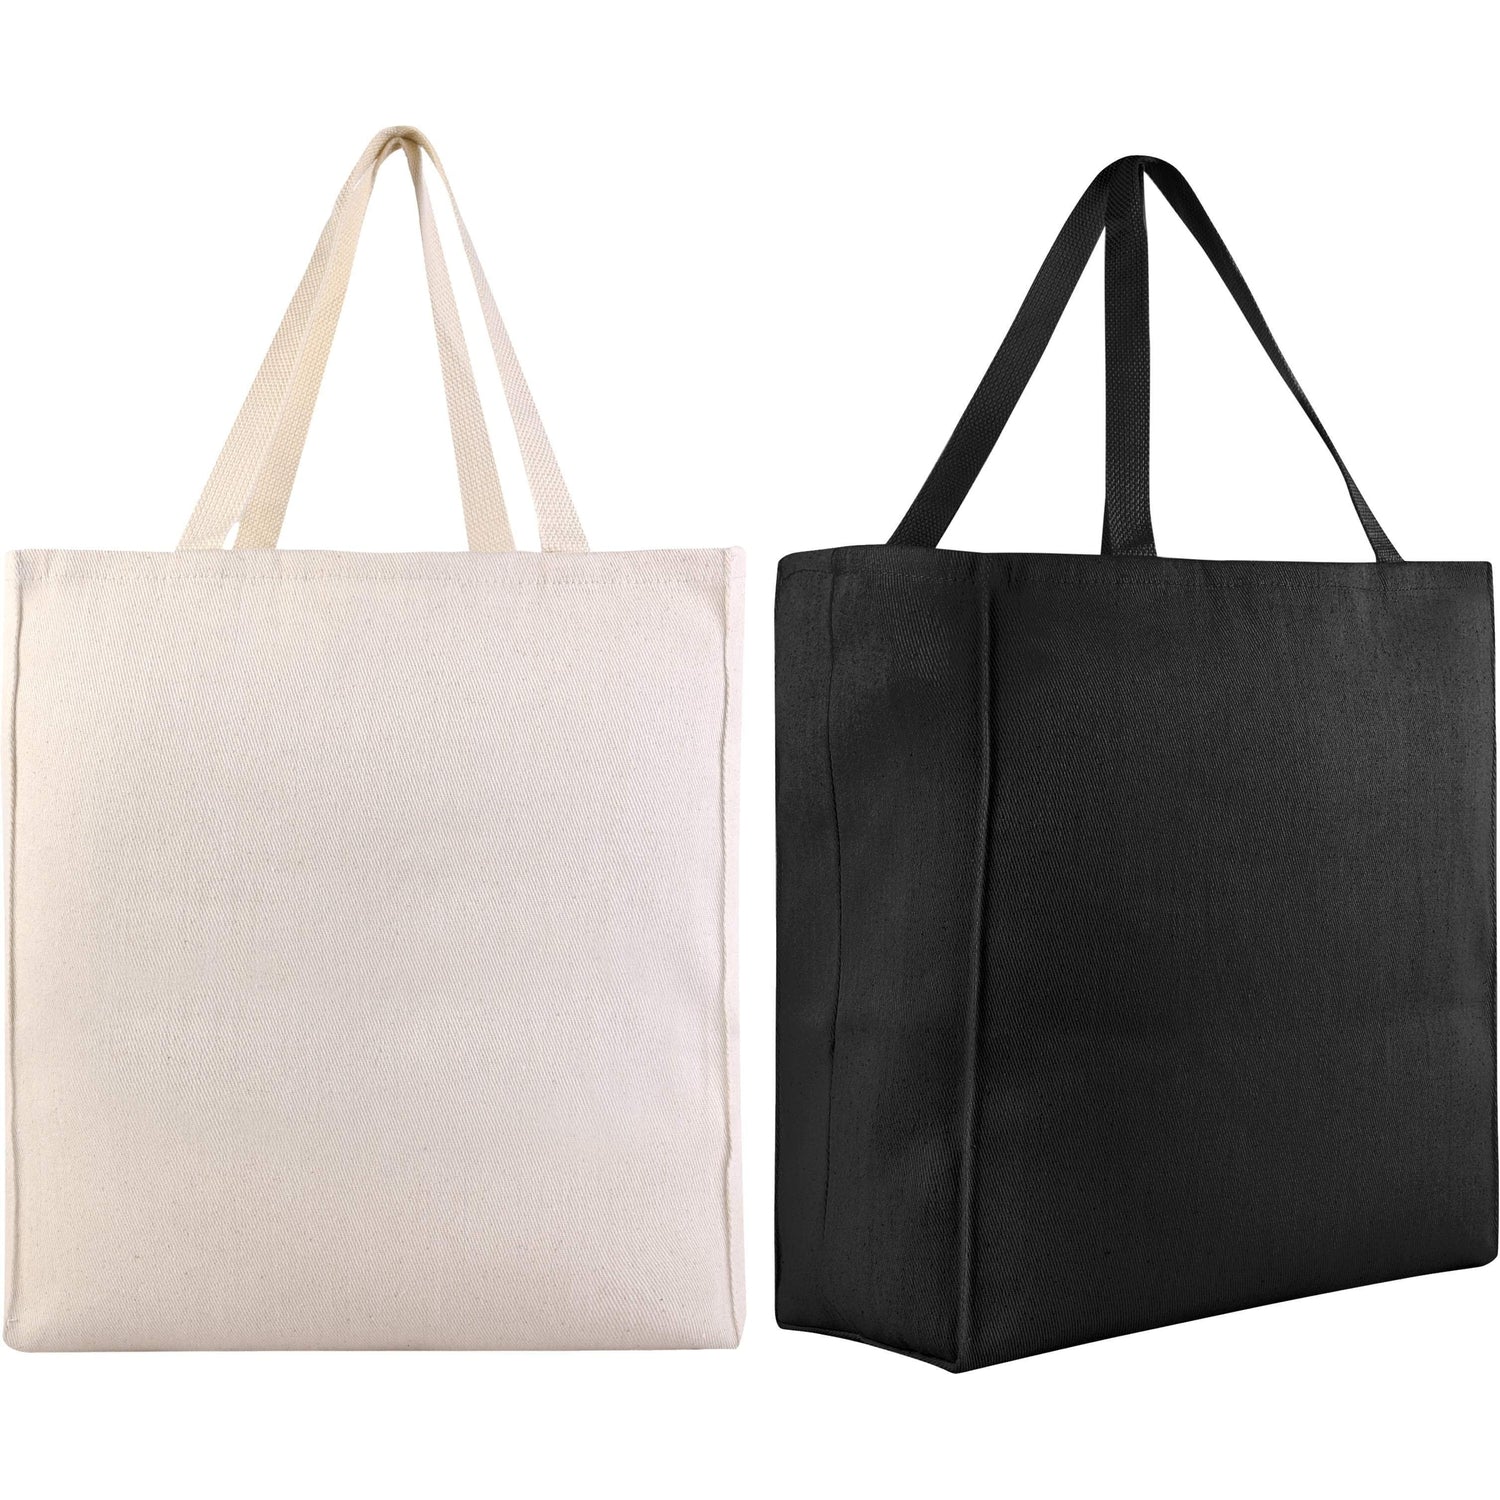 Recycled Tote Bags Wholesale Made In Usa | Paul Smith